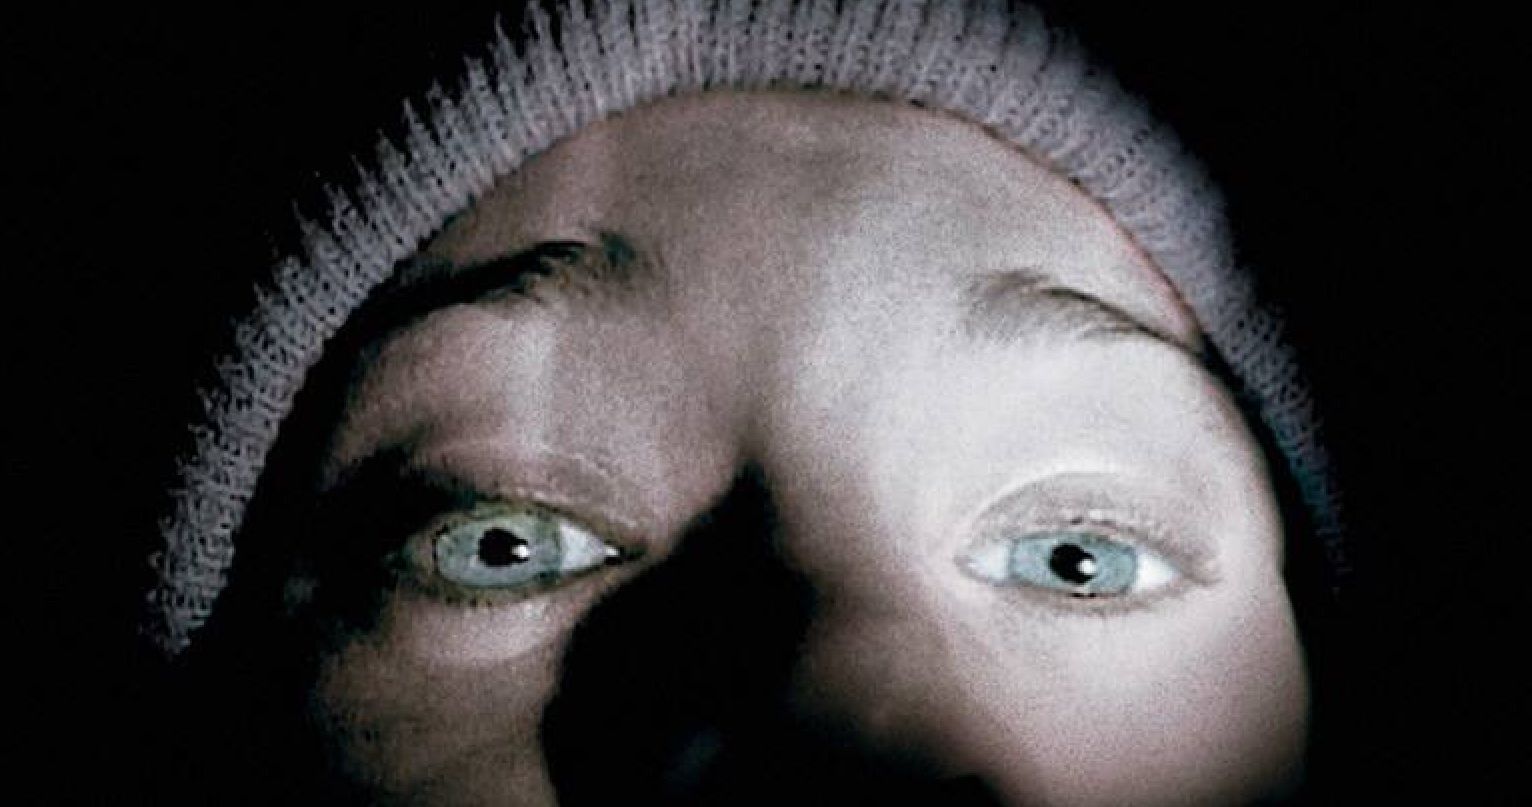 The Blair Witch Project Tops List of Scariest Movies According to New Study